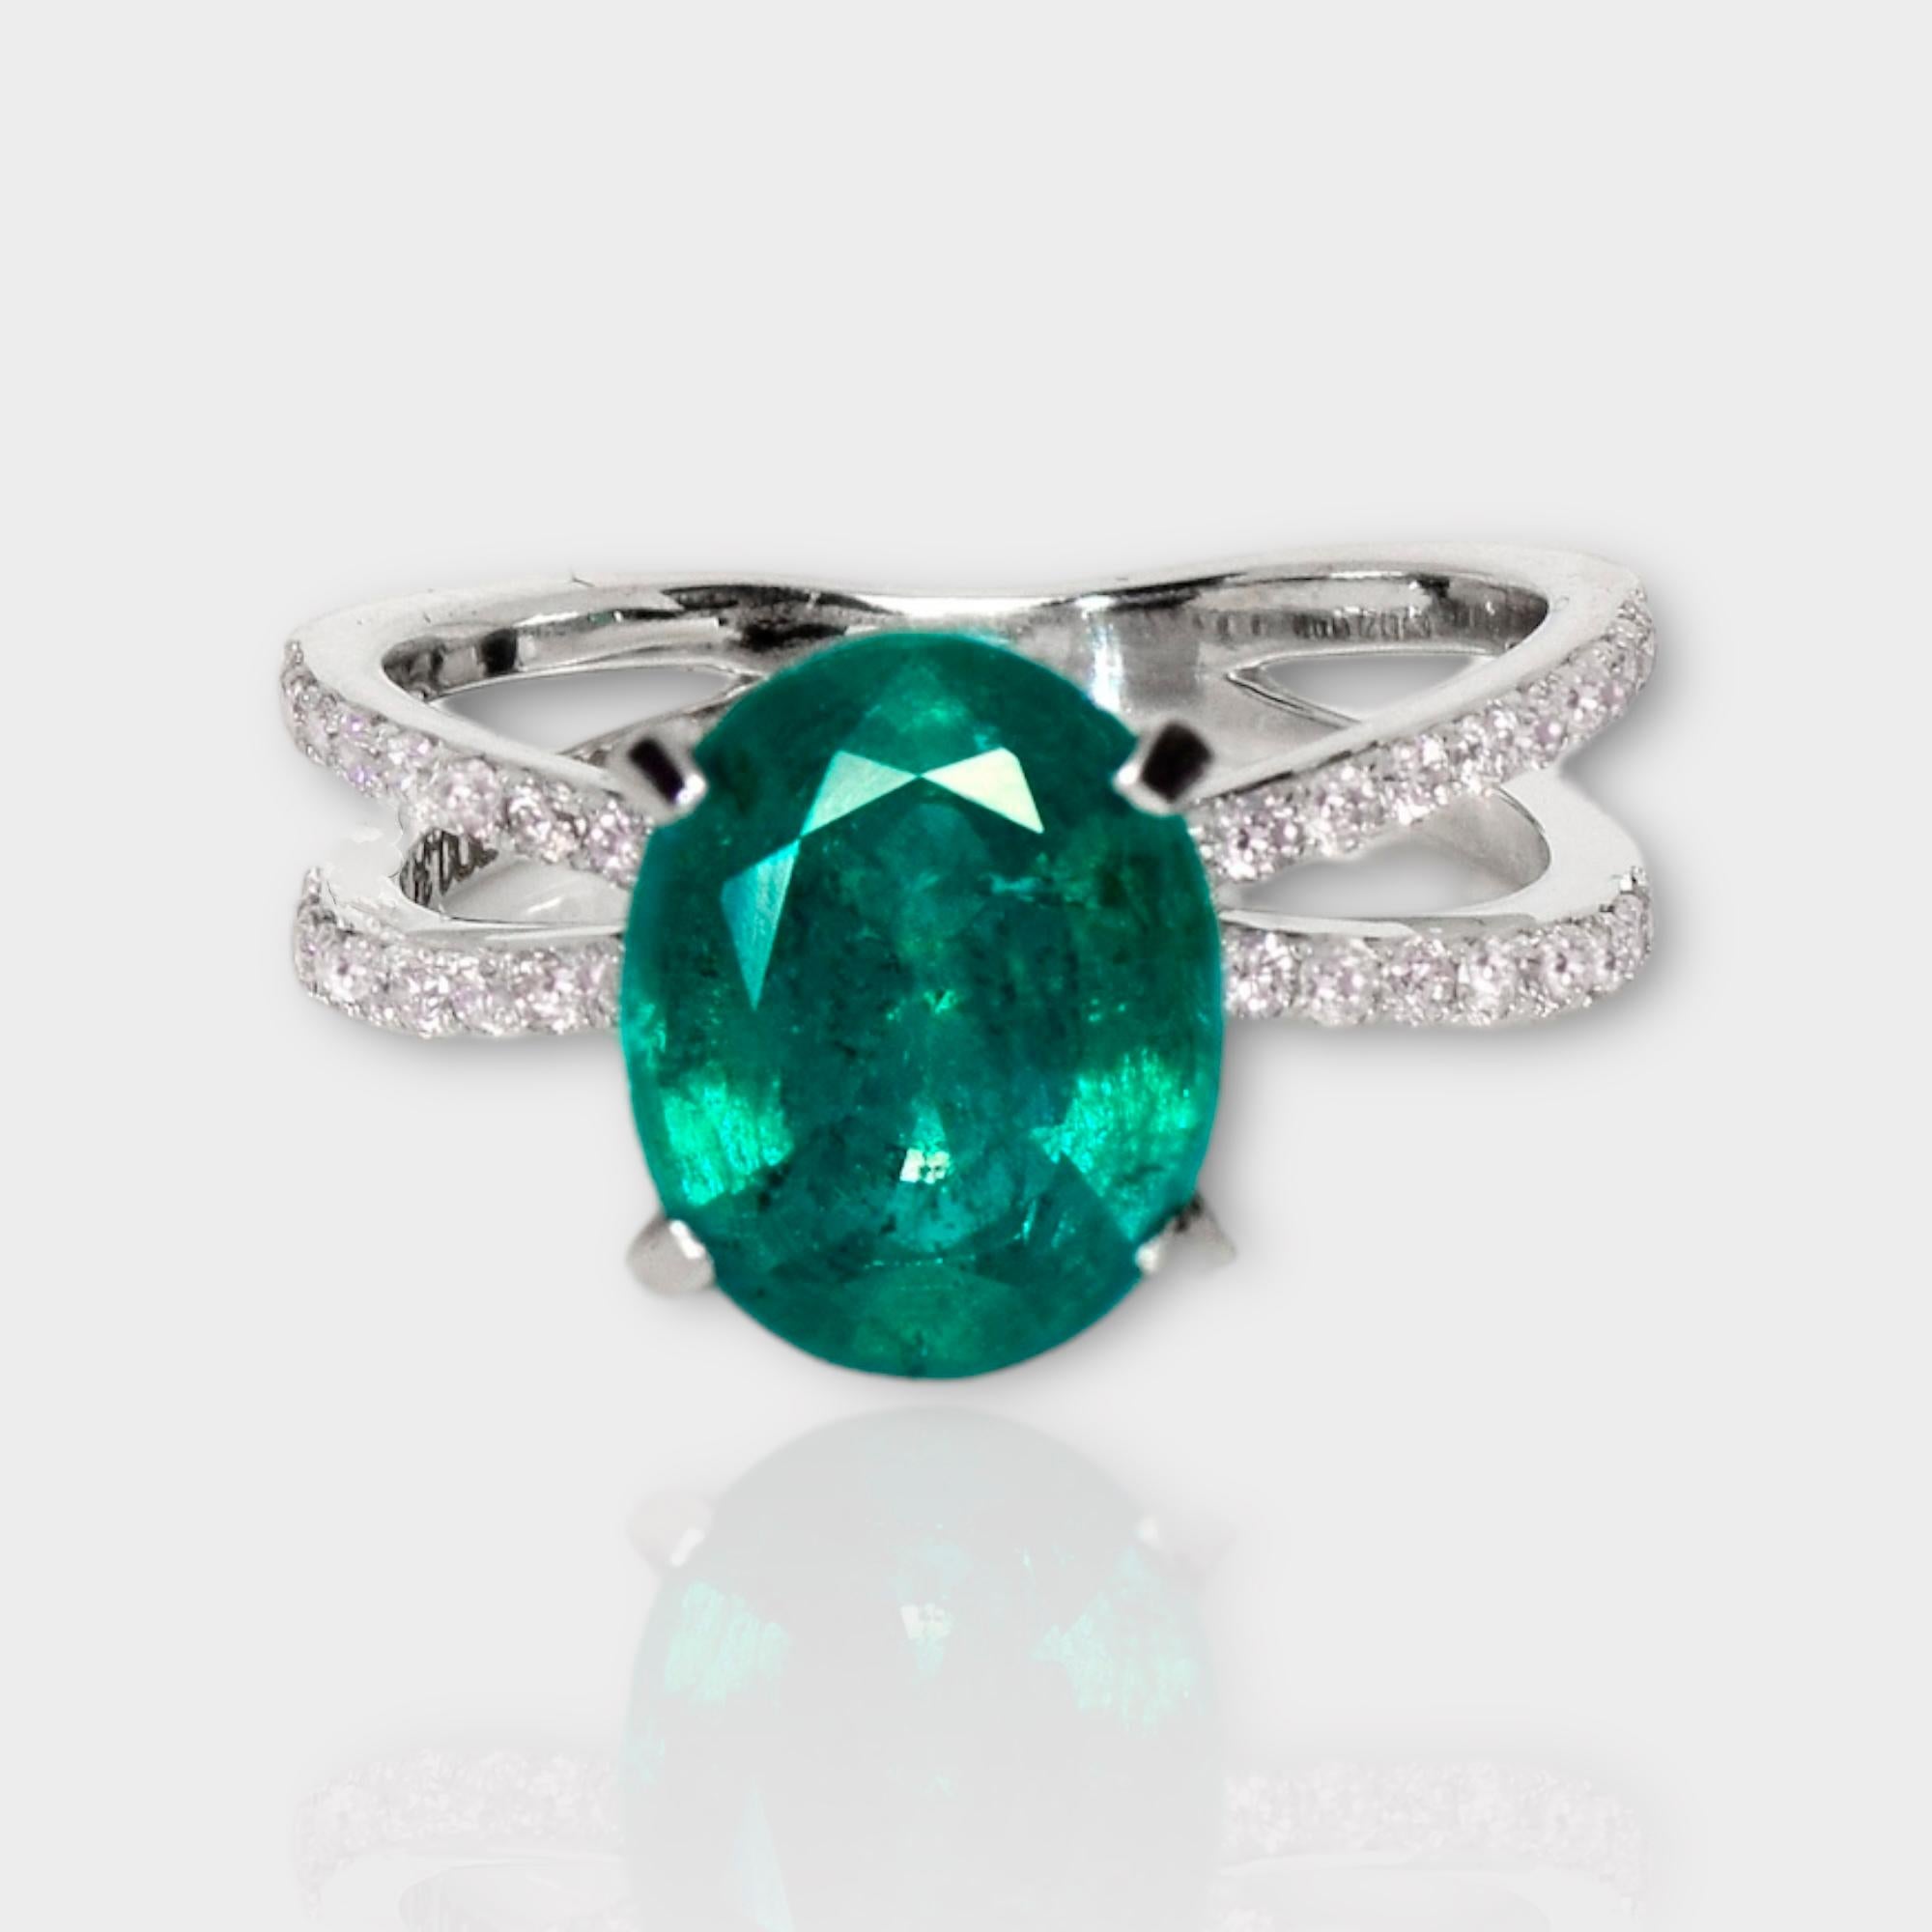 *14K White Gold 3.23 ct Emerald&Pink Diamonds Antique Art Deco Style Engagement Ring*

A natural Zambia green emerald weighing 3.23 ct is set on a 14K white gold arc deco design band with natural pink diamonds weighing 0.34 ct.

The good-quality